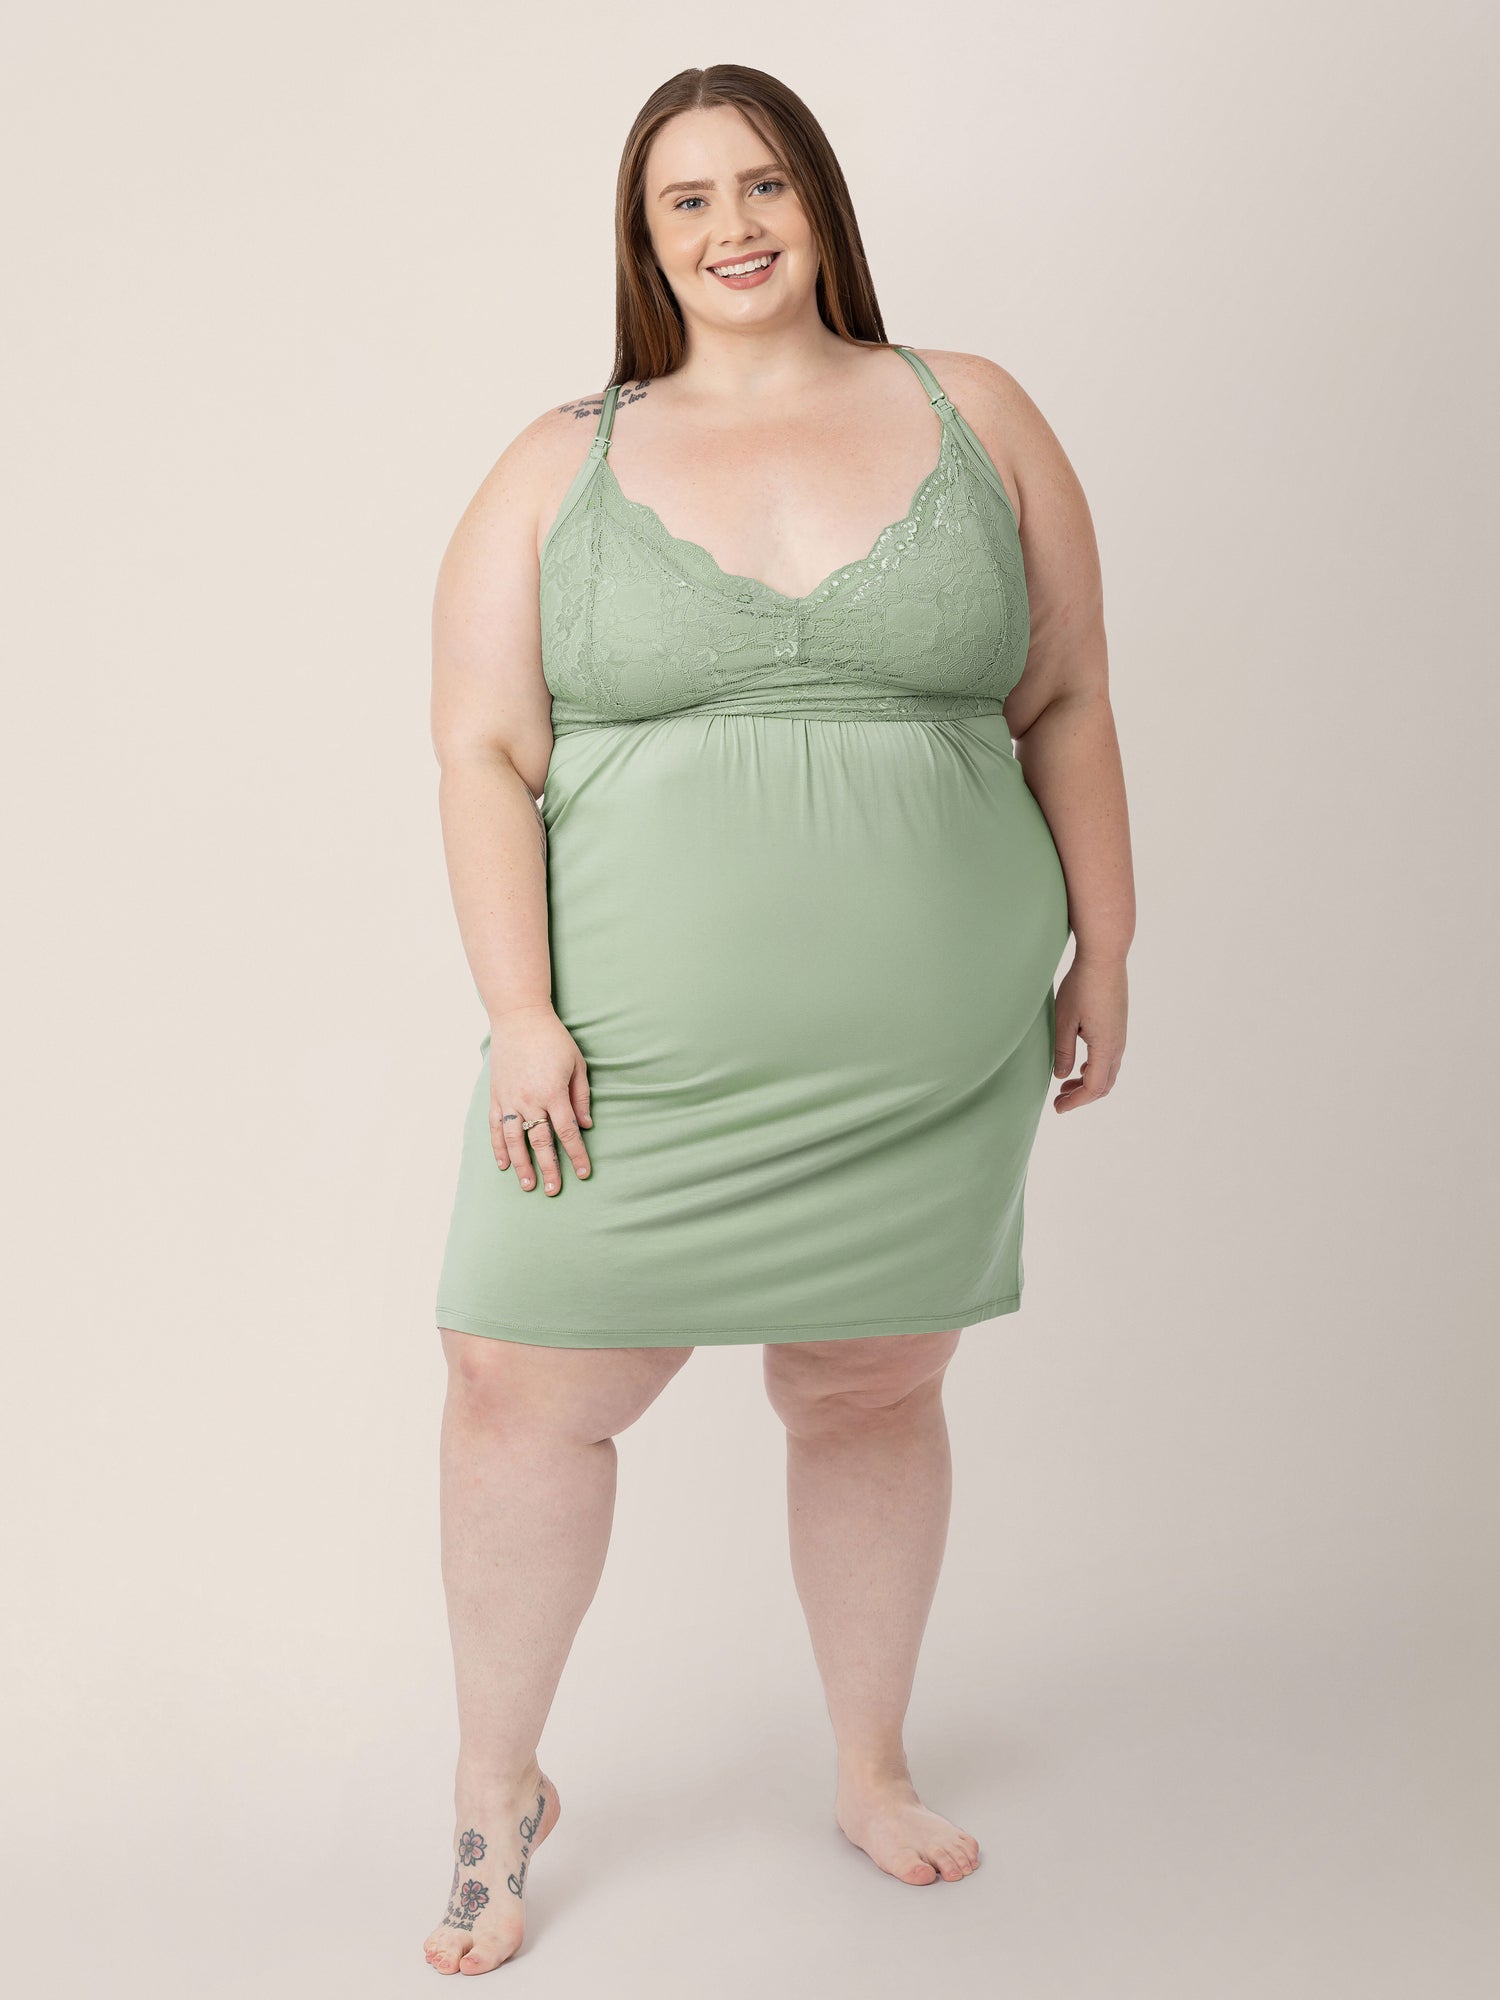 Model wearing the Lucille Maternity & Nursing Nightgown in Pistachio with her hands at her sides. @model_info:Hayley is 5'7" and wearing a 1X.